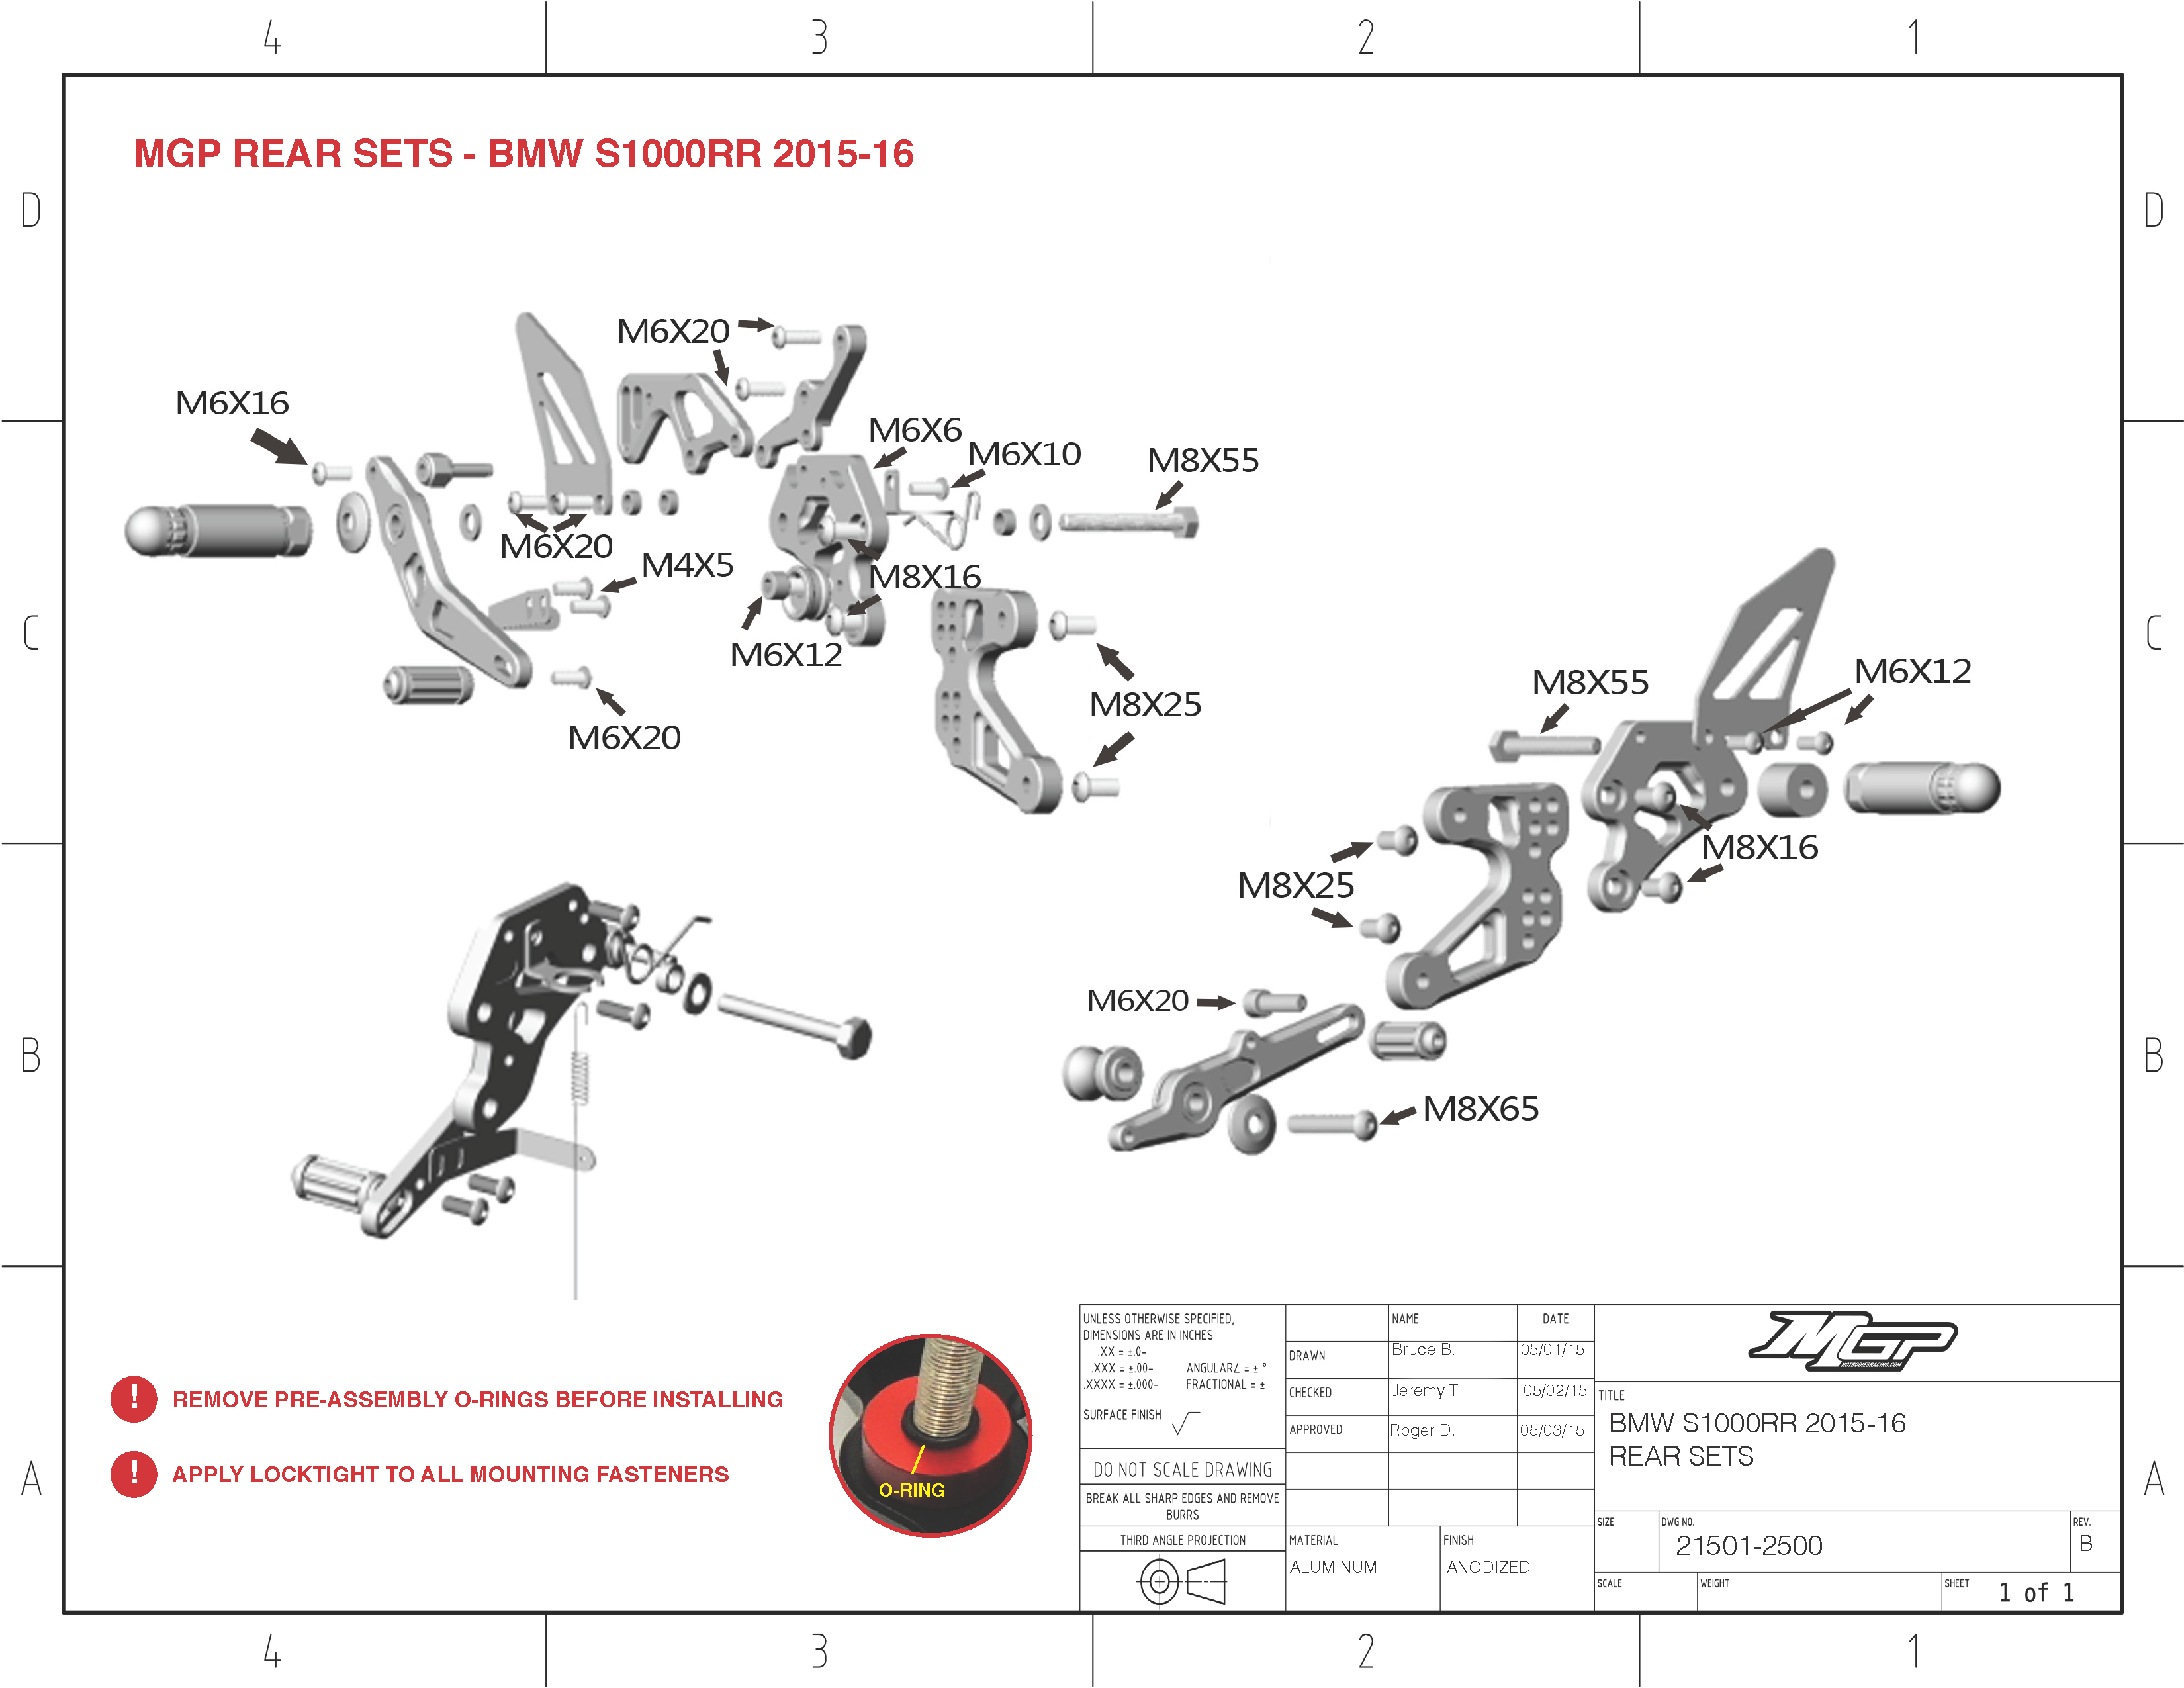 

S1000RR 2015-16 MGP Rearsets Installation

